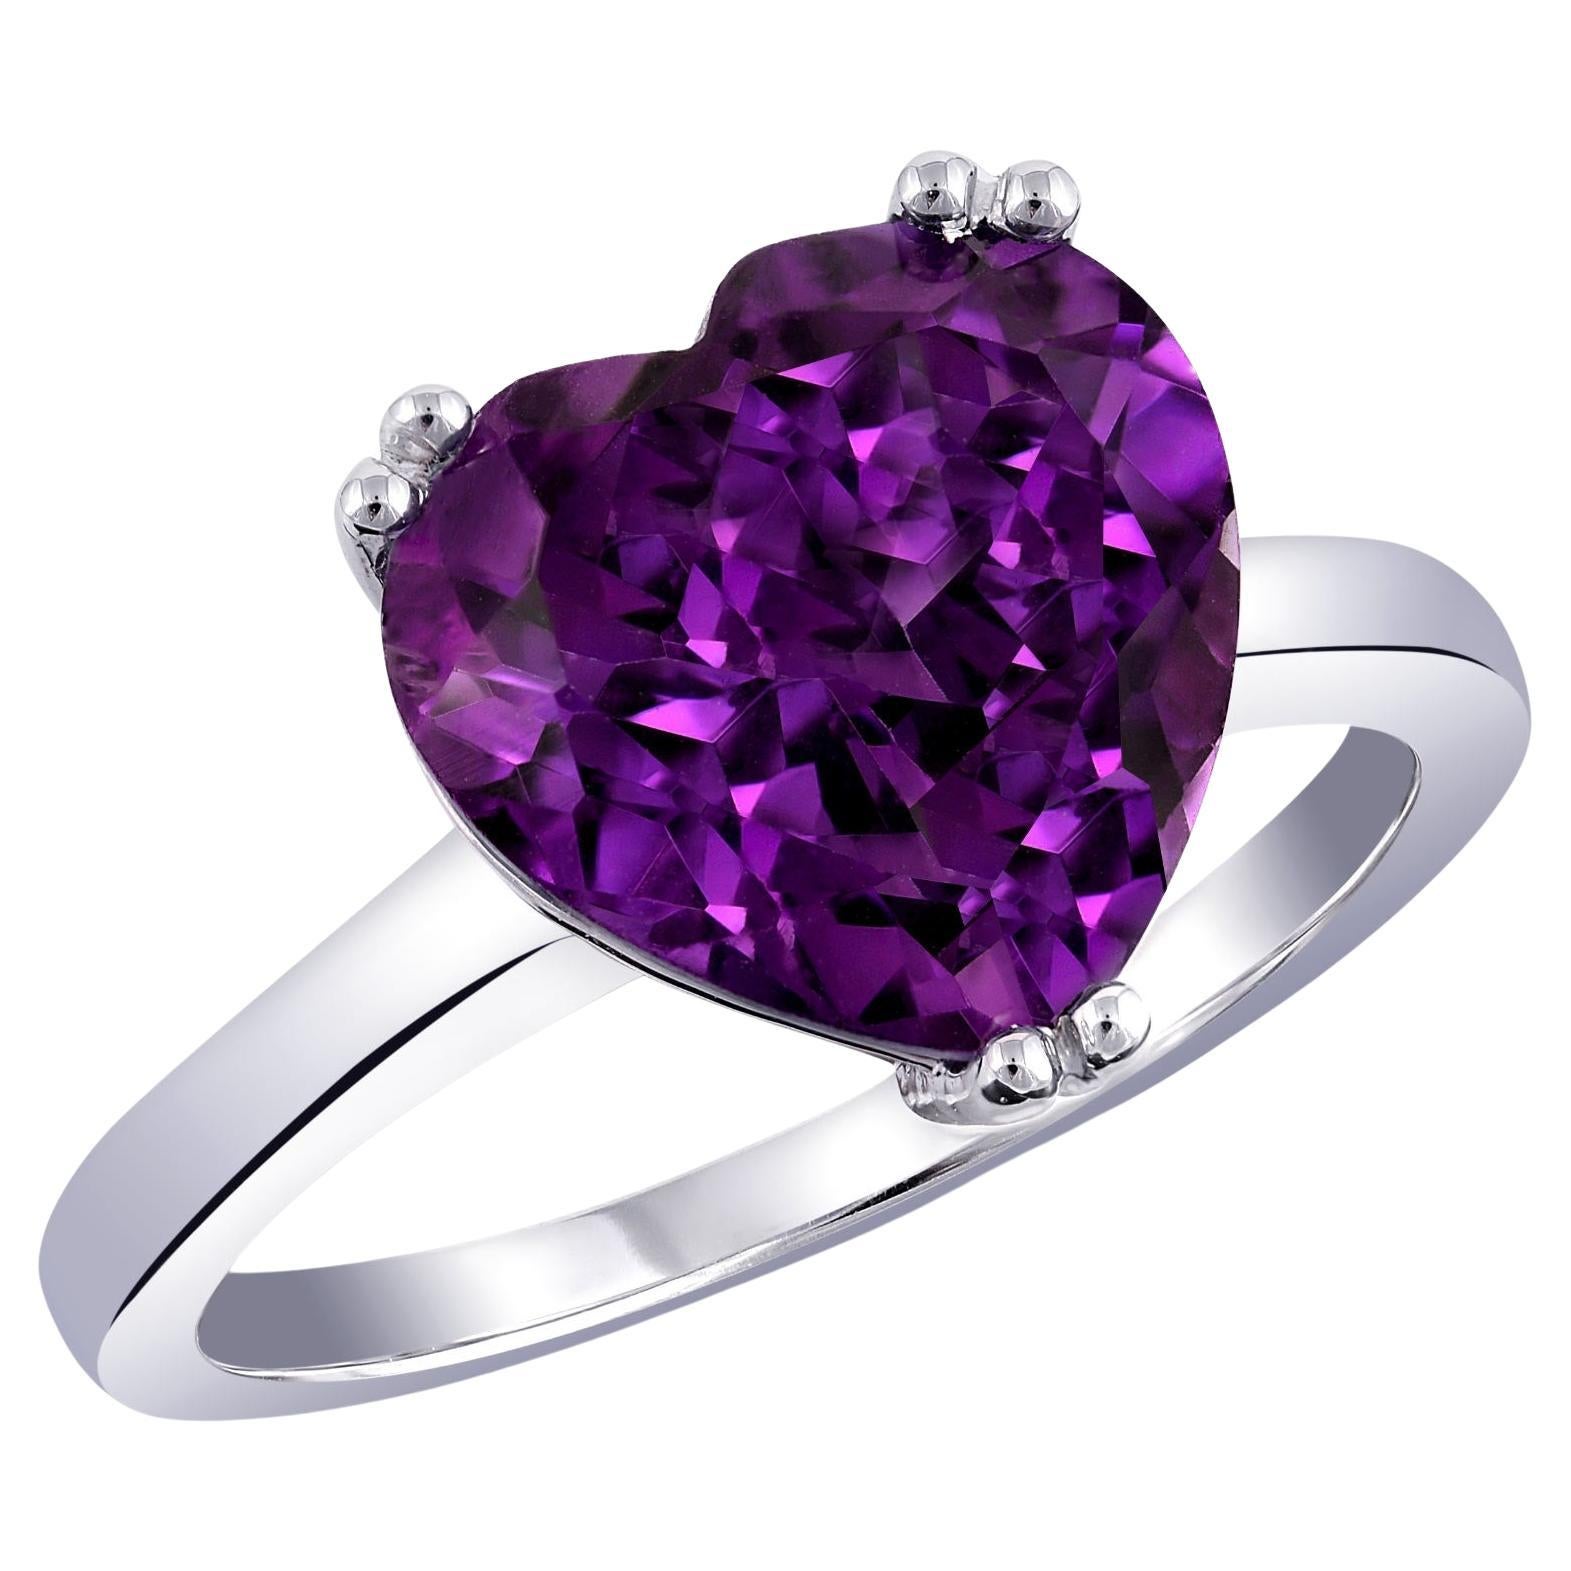 4.01 Carats Amethyst set in 14K White Gold Ring For Sale